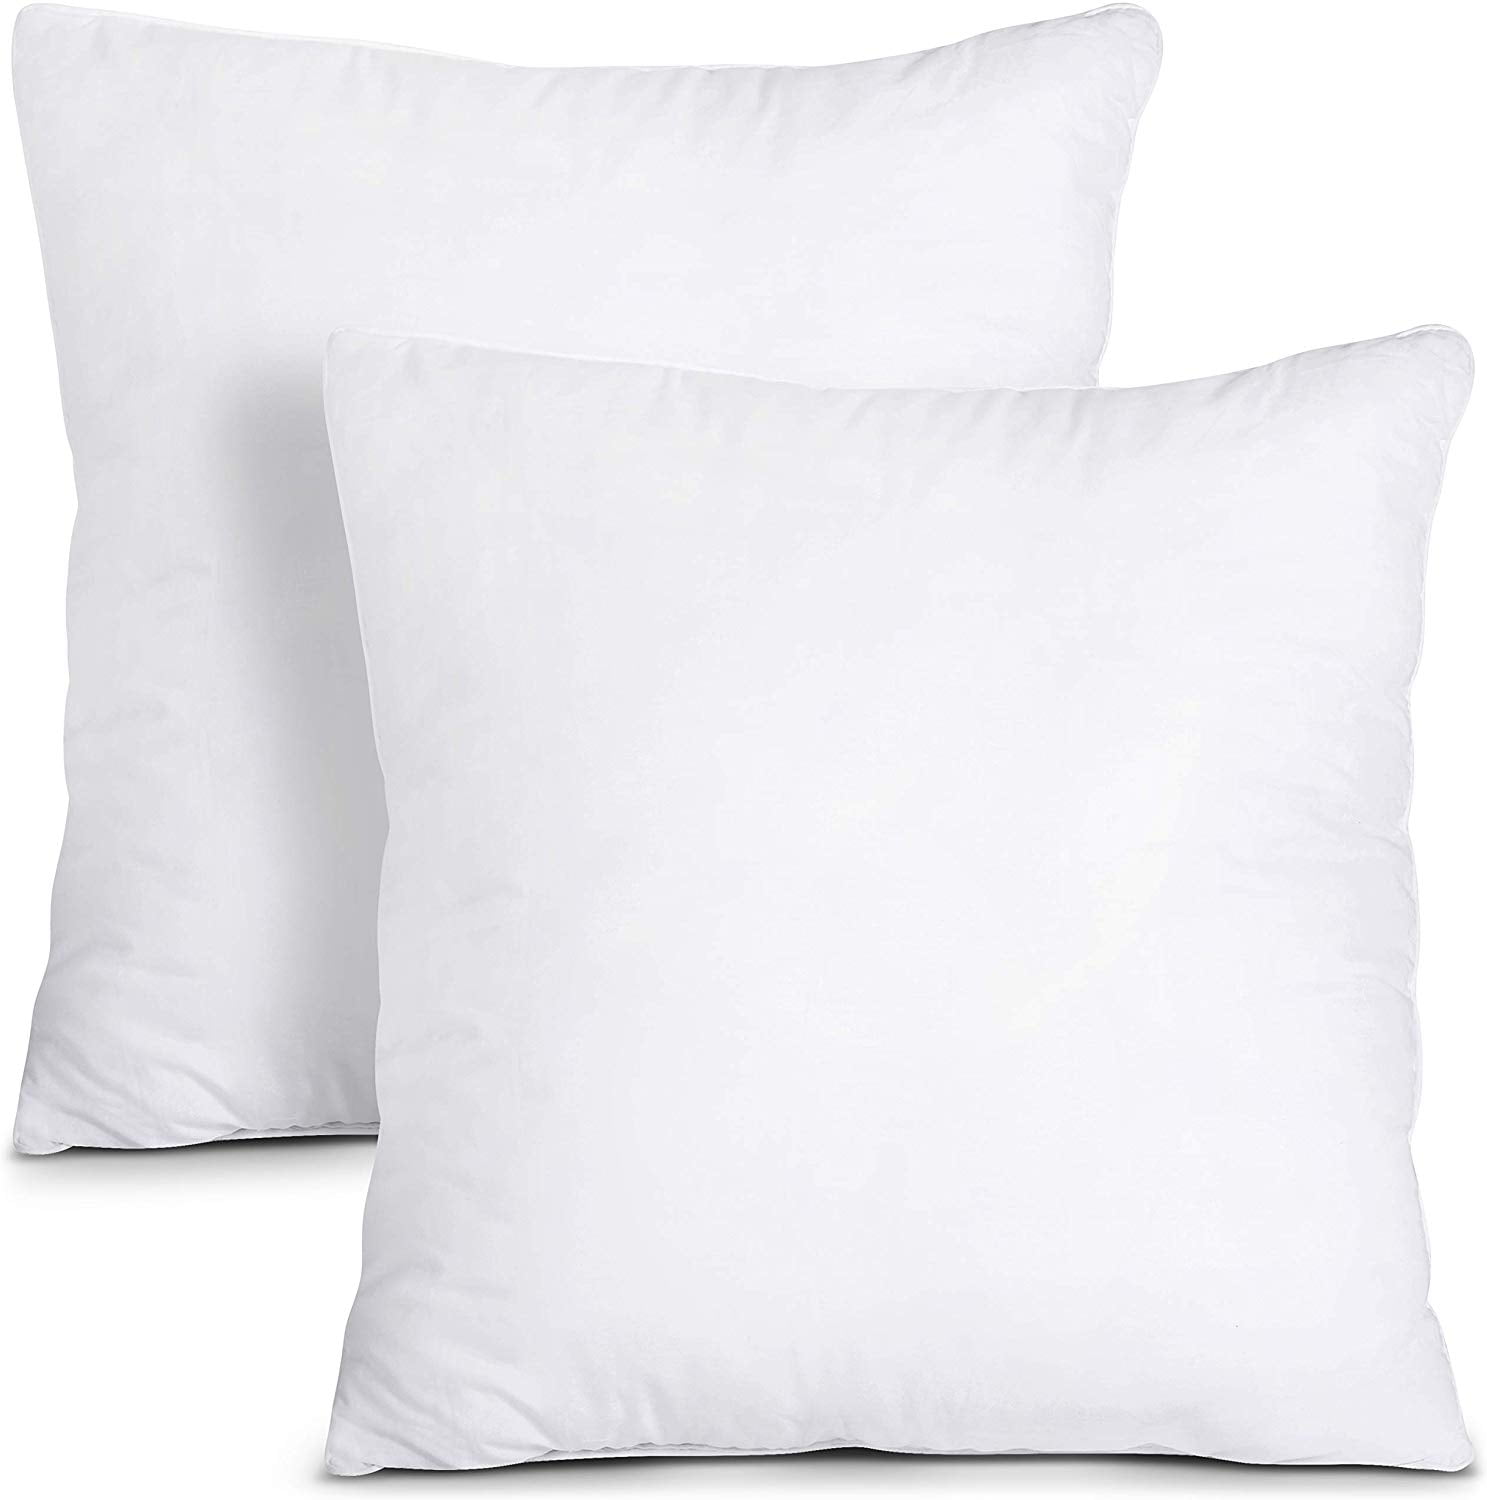 Ashler 18x18 Pillow Inserts, Throw Pillows Insert Set of 2, 100% Cotton  Cover, 18x18 Inches Bed and Couch Pillows, Indoor and Outdoor Decorative